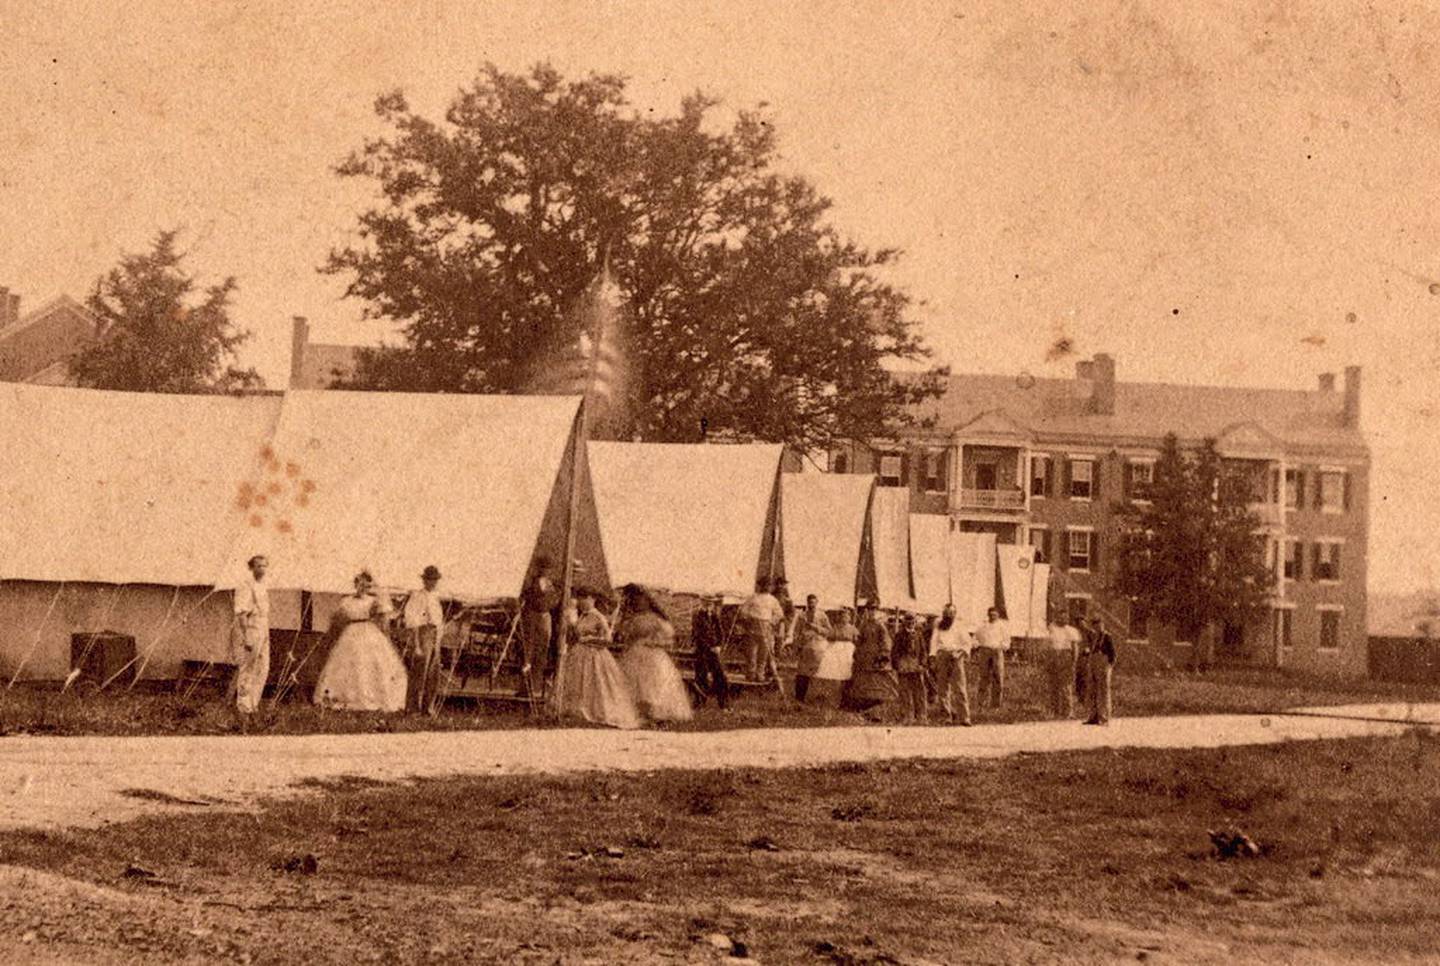 Nurses and other staff stand in the tent ward at U.S. General Hospital Division No. 1 on the grounds of the Naval Academy during the Civil War.